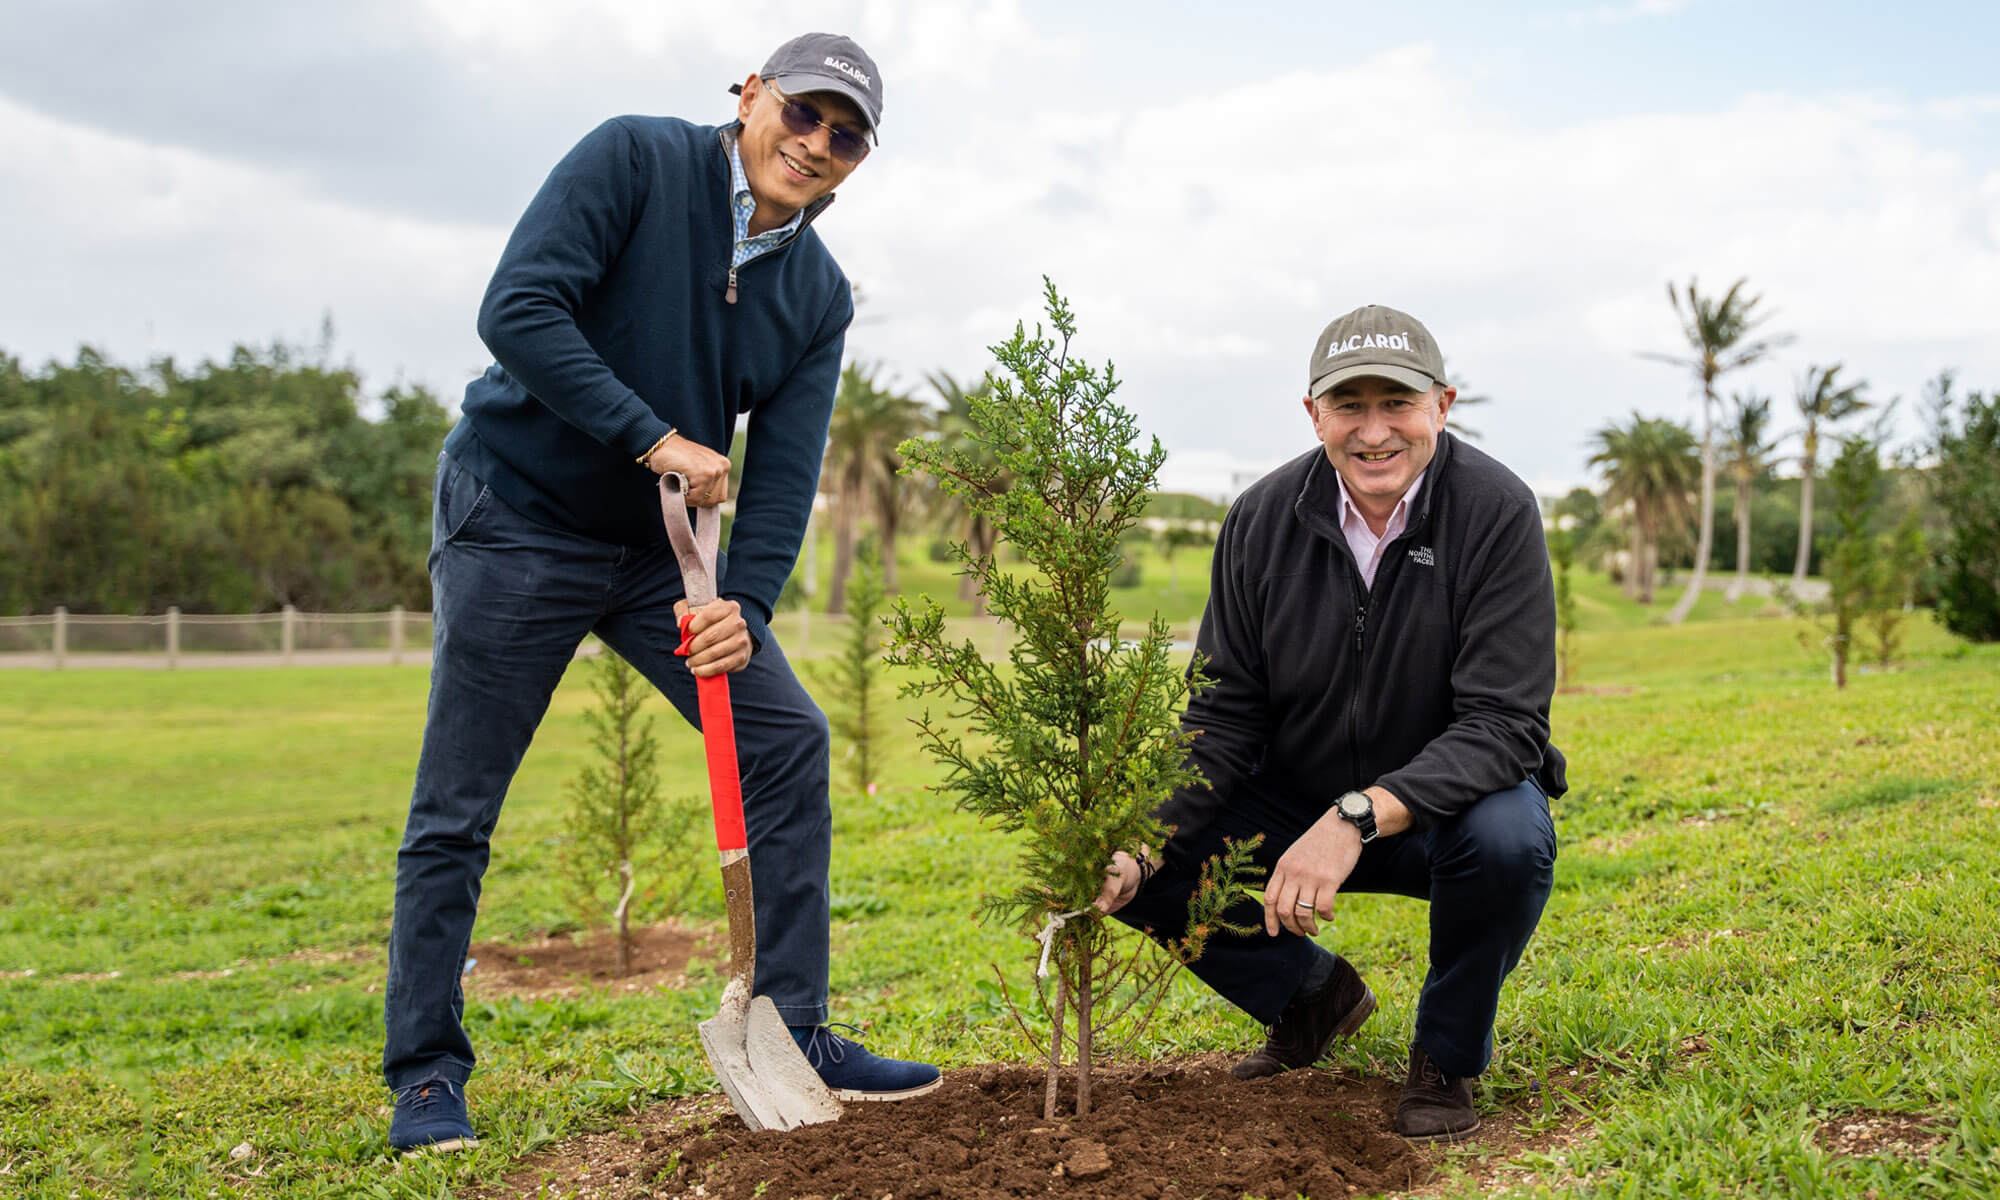 Bacardi plants a tree for every employee to celebrate its 161 annivesary featured image